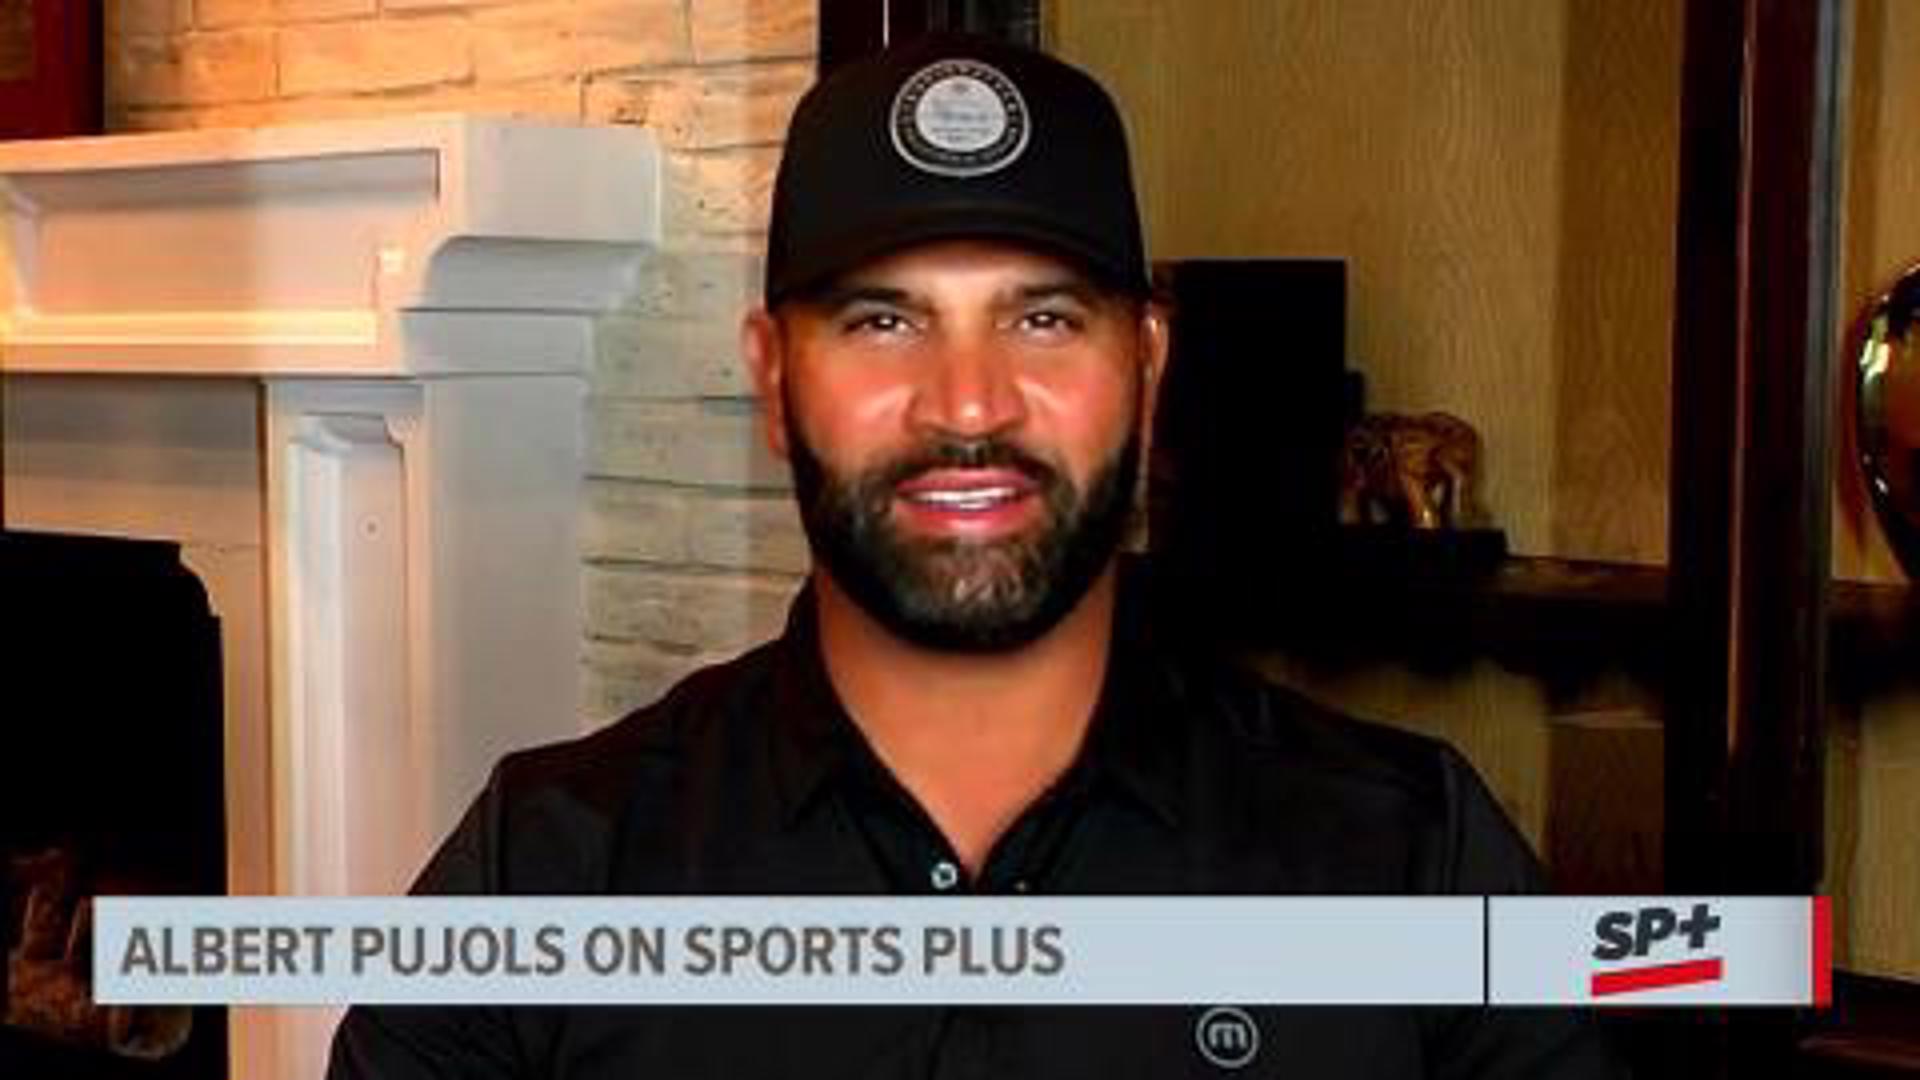 Pujols admits he hasn't watched much baseball since retirement